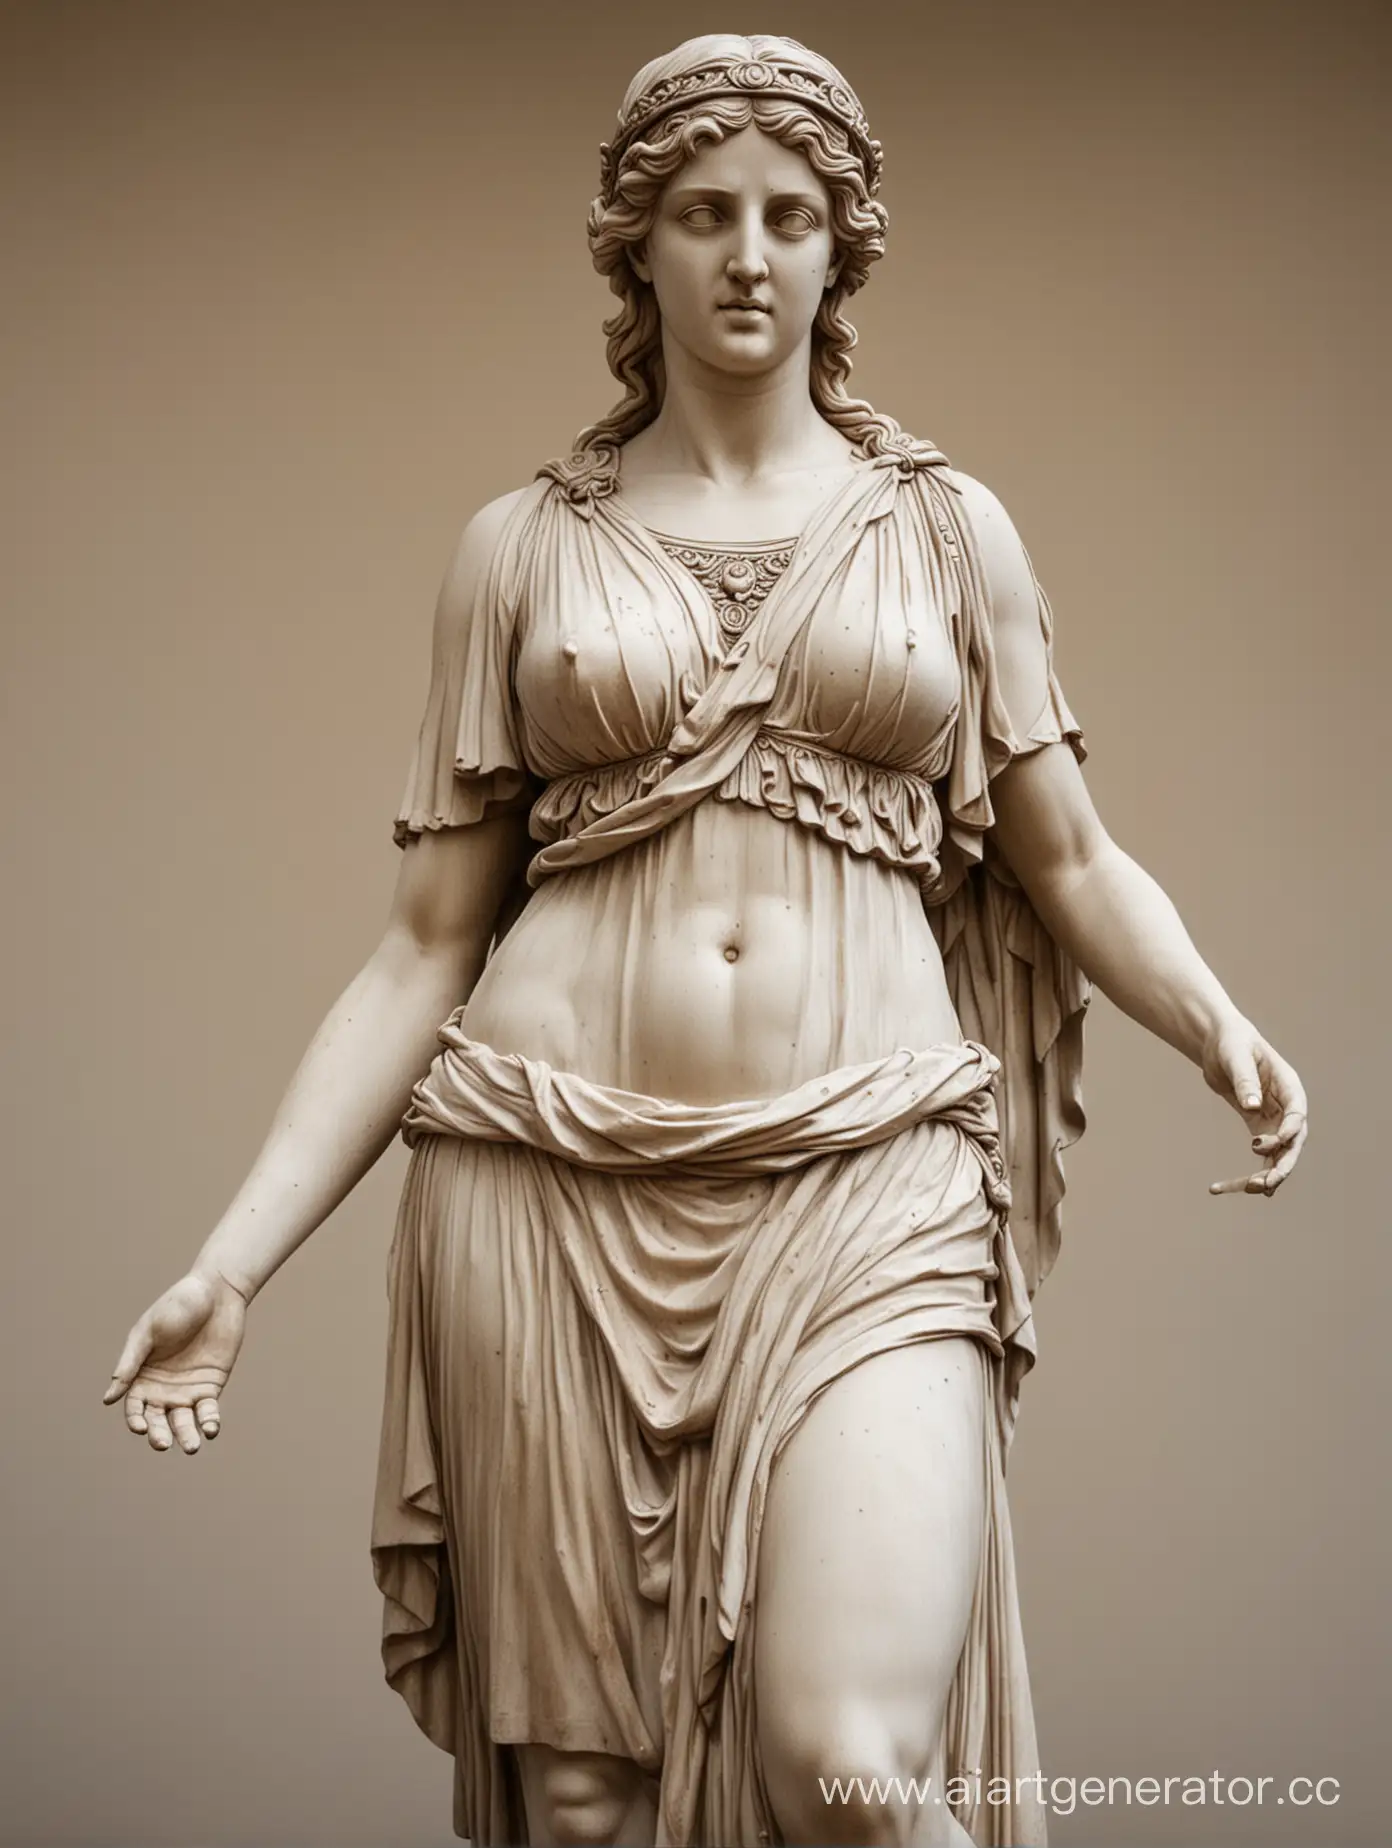 Full-Height-Statue-of-Fortuna-the-Greek-Goddess-with-Blindfolded-Eyes